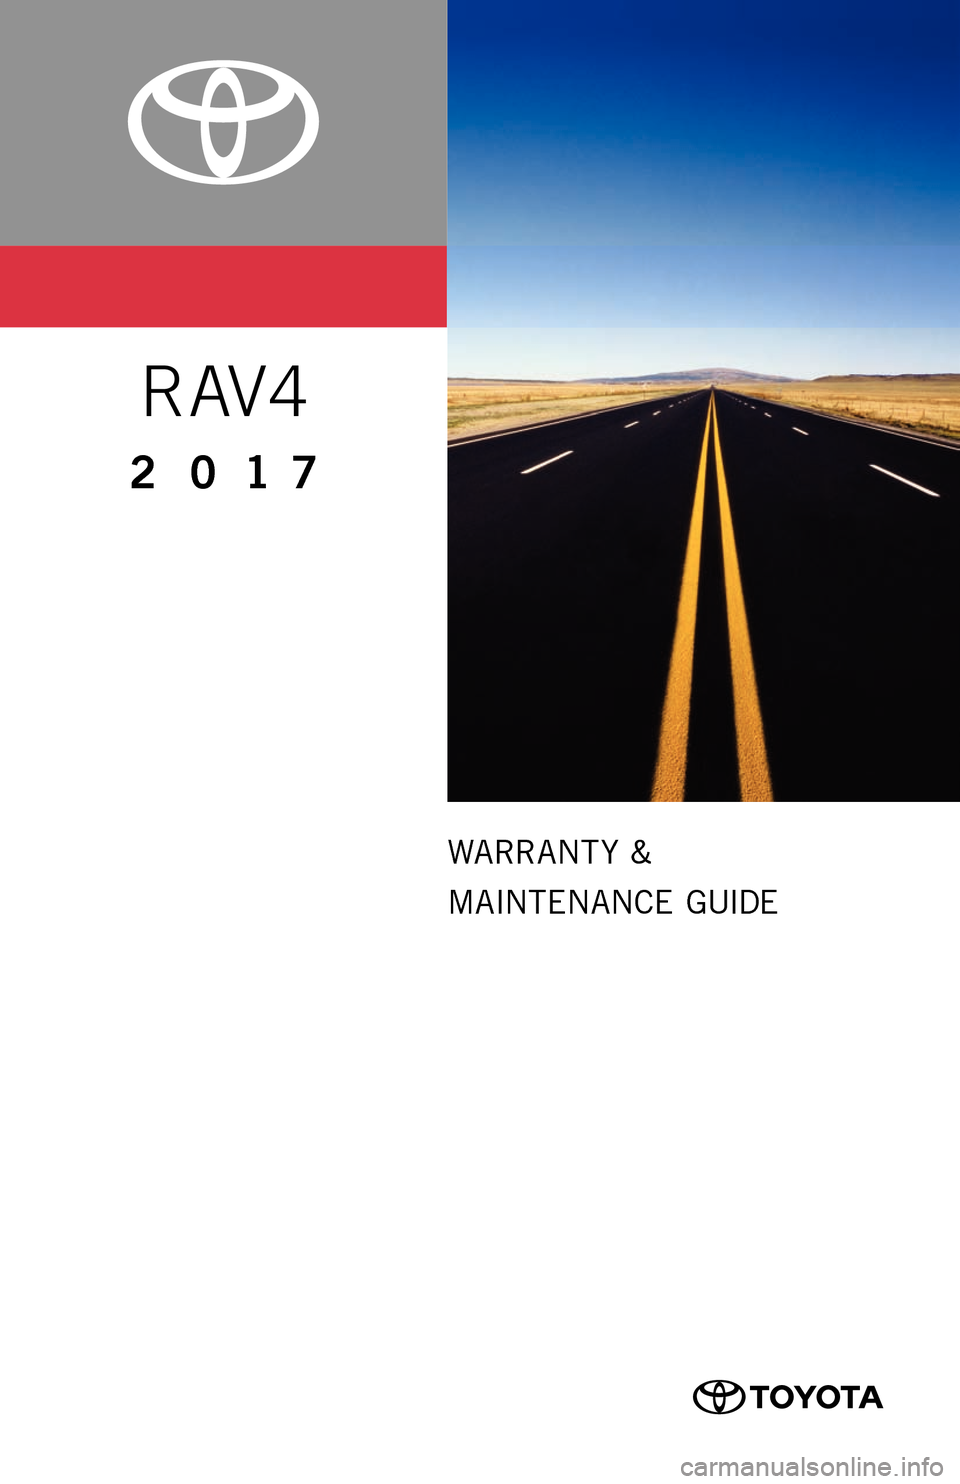 TOYOTA RAV4 2017 XA40 / 4.G Warranty And Maintenance Guide 0050517WMGRAV4
WARRANT Y &
MAINTENANCE  GUIDE
RAV4
2 0 1 7
16-TCS-09456_WMG_RAV4_2_0F_lm.indd  27/25/16  2:02 PM 